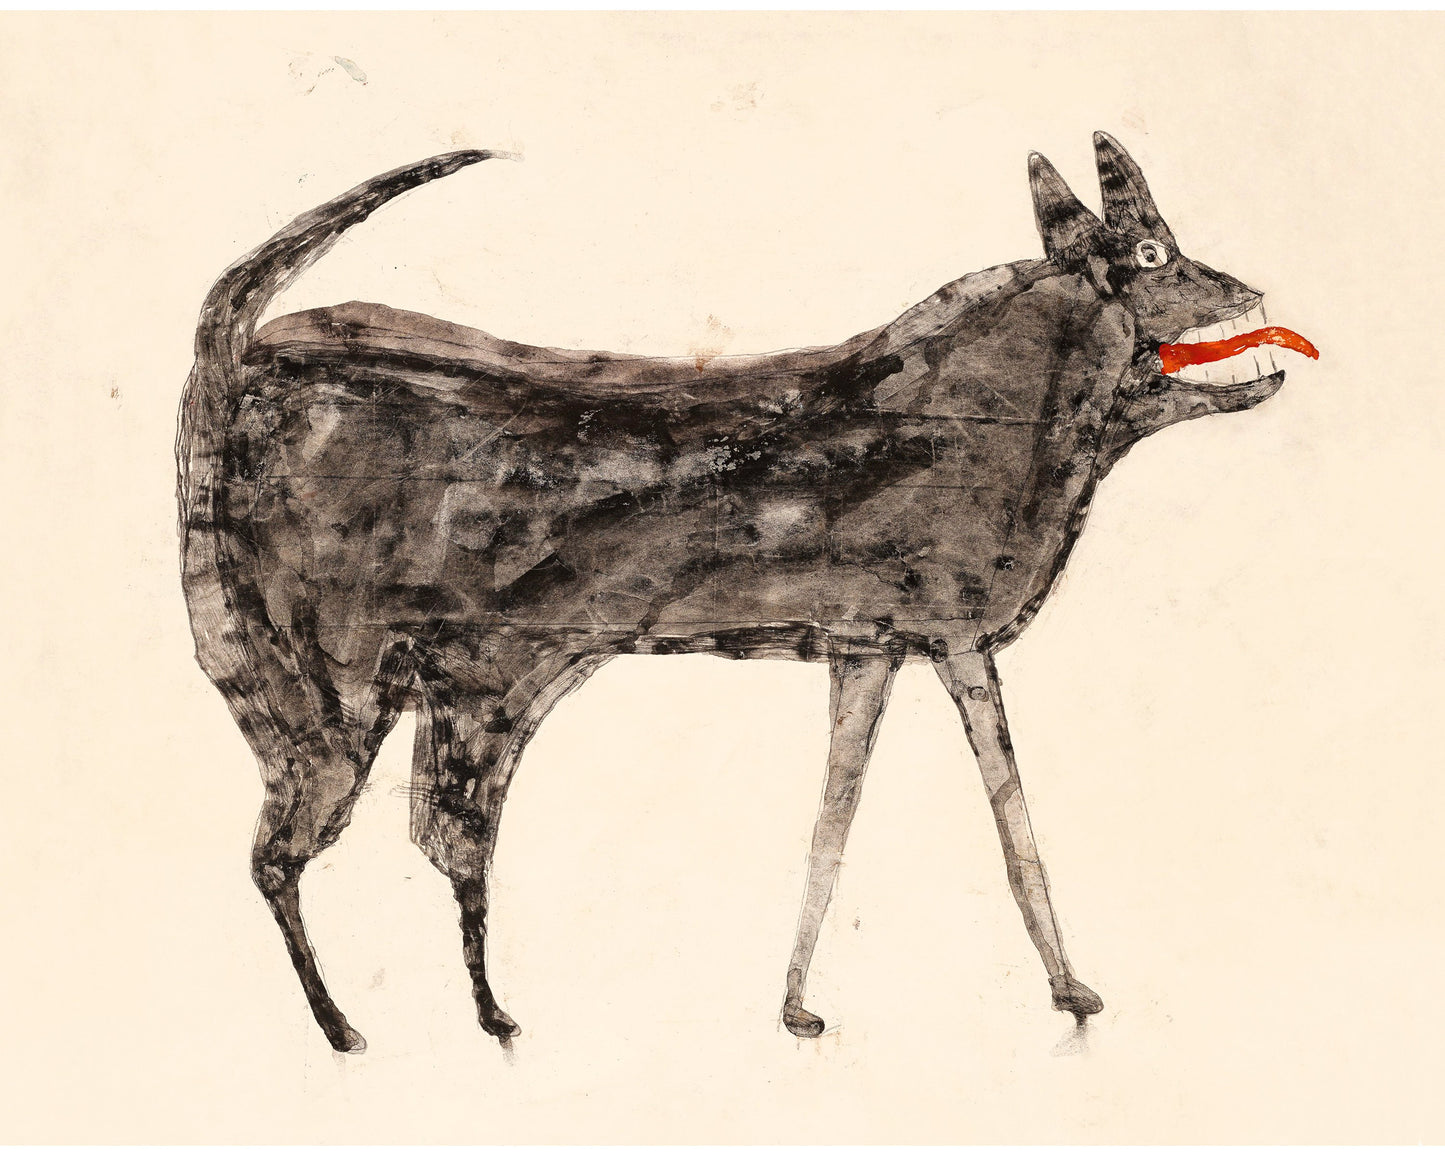 Bill Traylor Americana art | Black dog with red tongue | Animal folk art | African American self-taught artist | Modern vintage wall décor